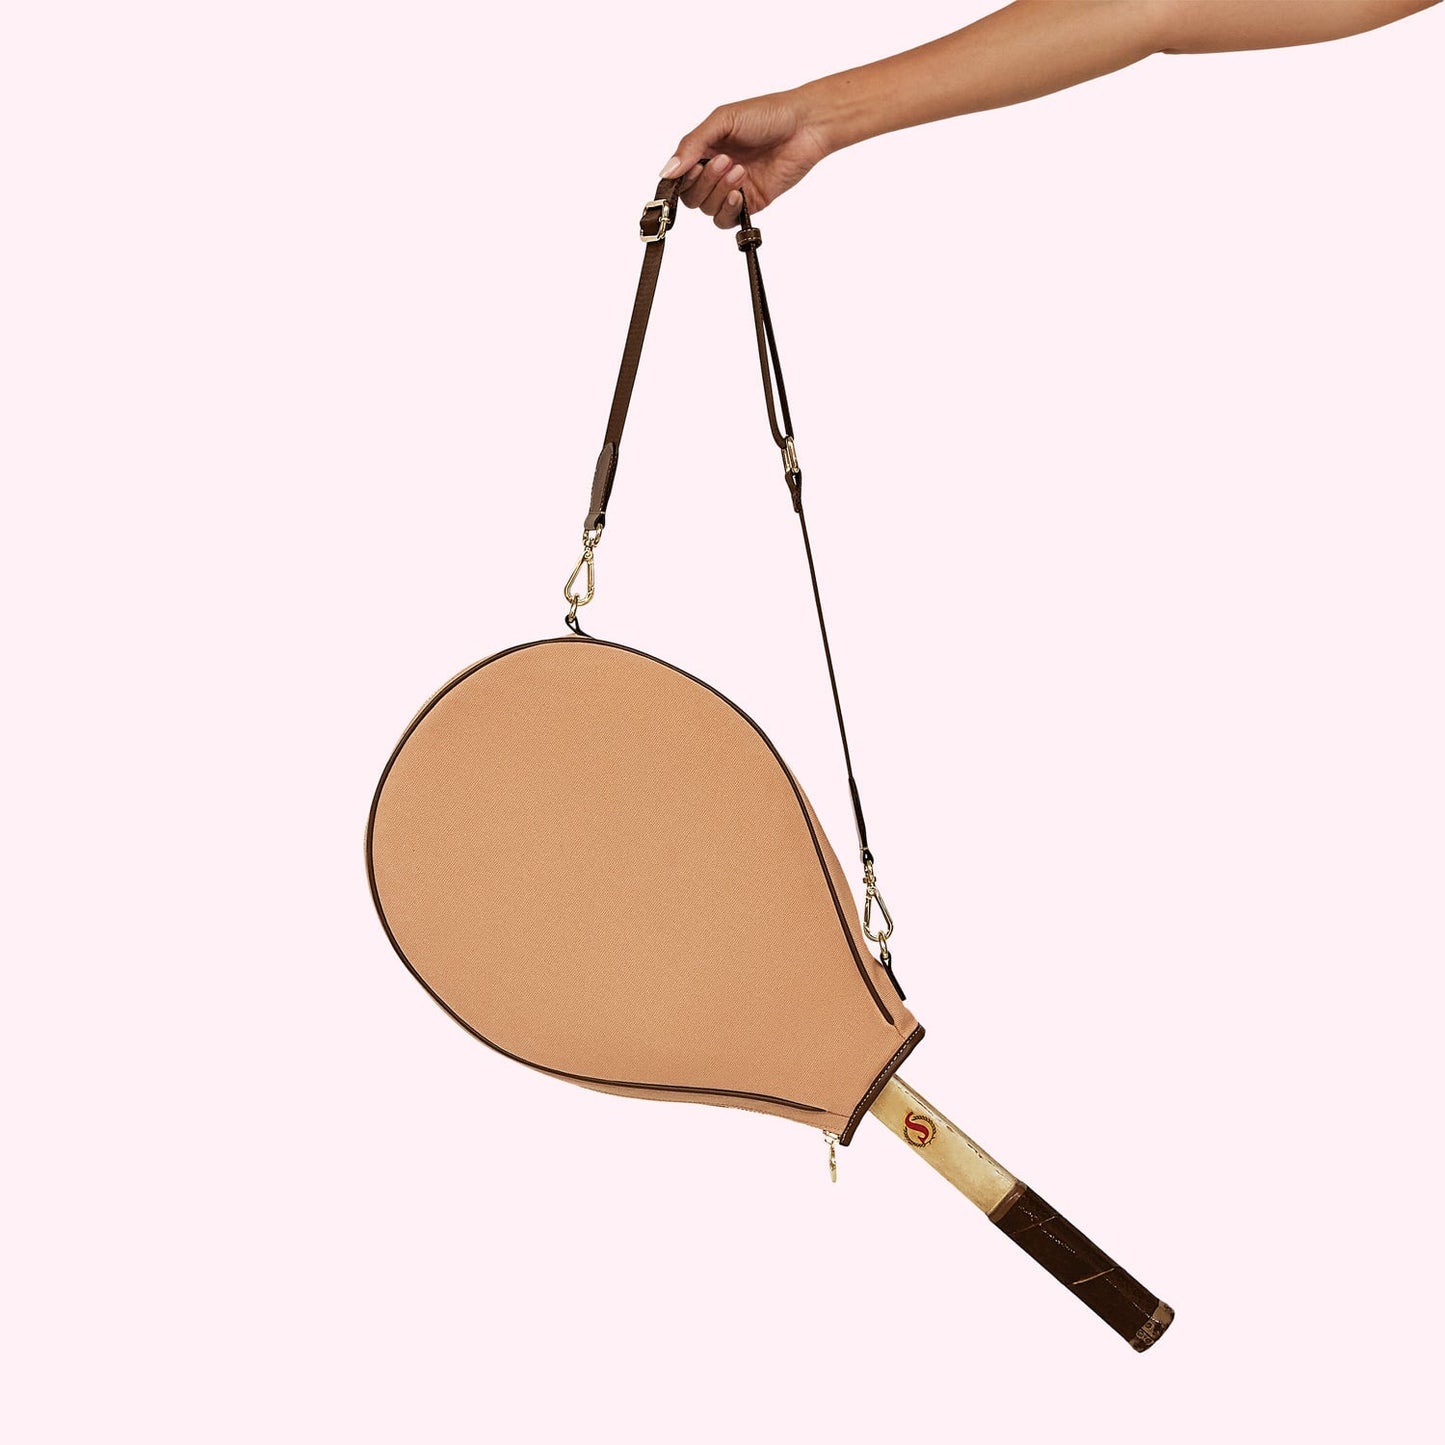 Racket Cover